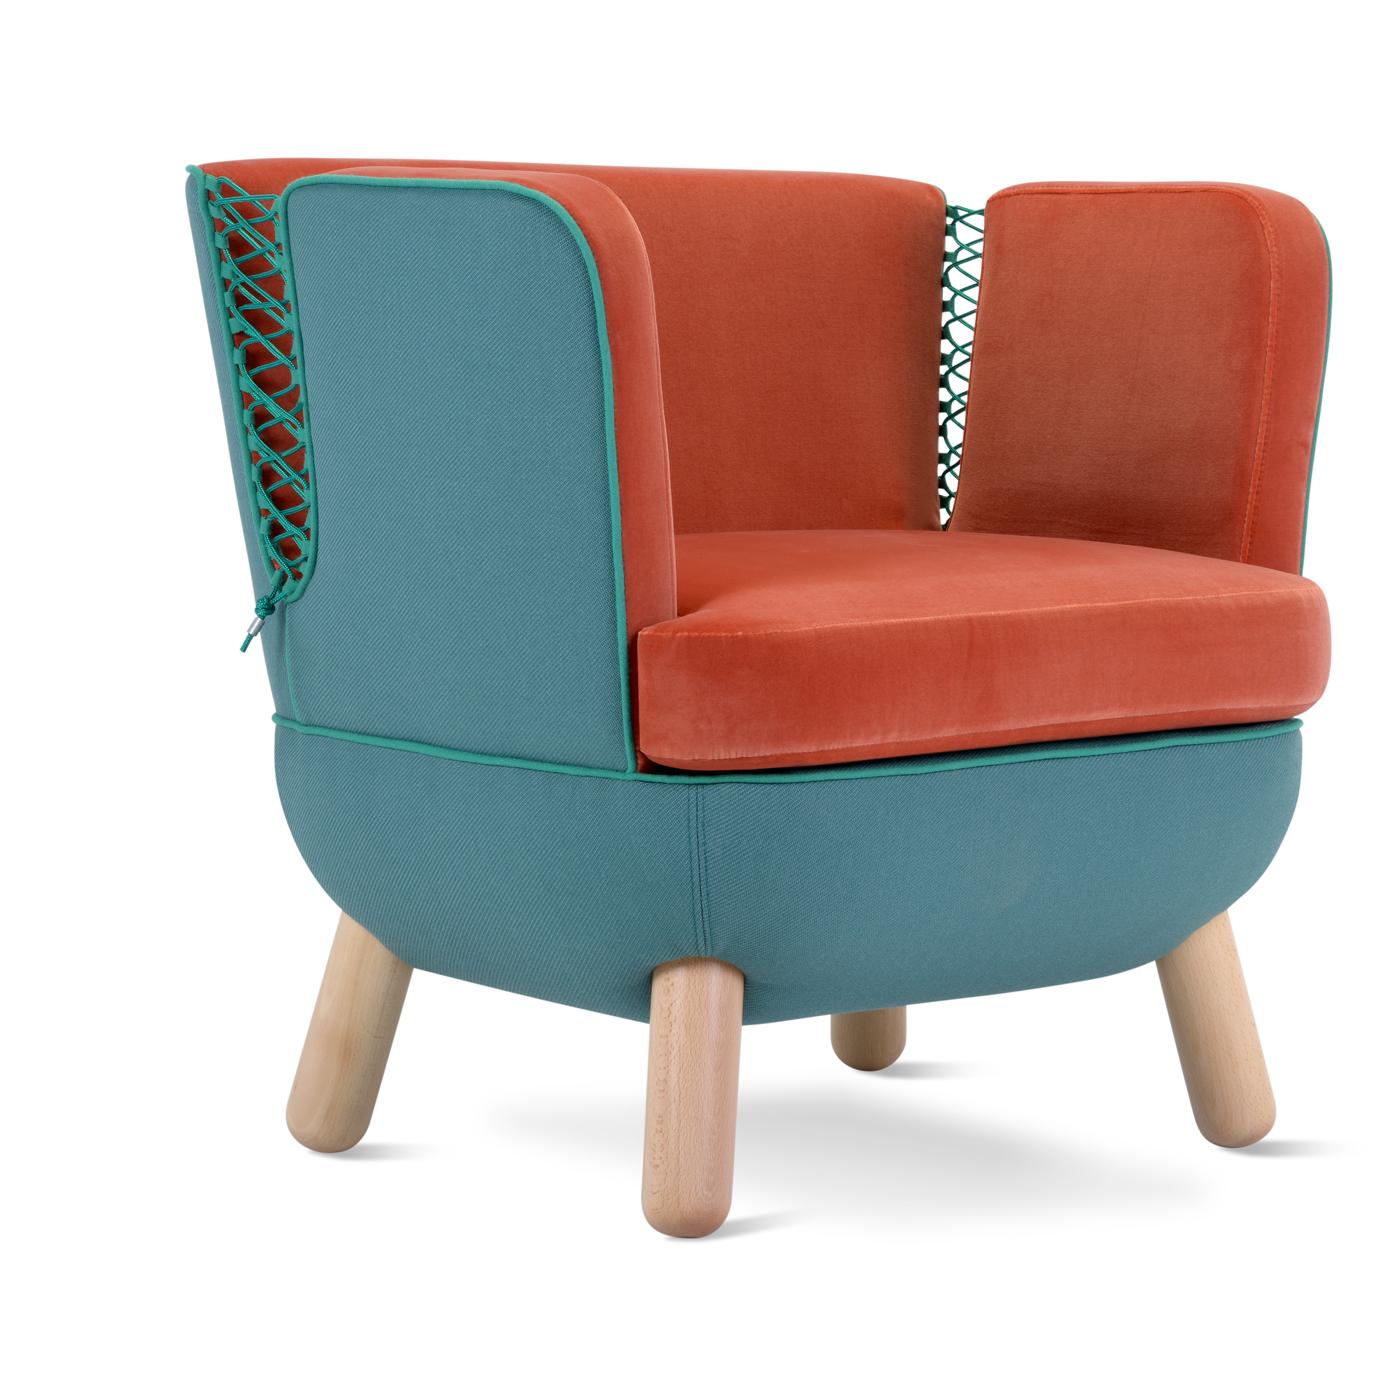 Full curves and an enveloping shape are what characterize the sly armchair. The back, available in a low or high version, features slits closed with interwoven polypropylene cords available in orange, red, purple, blue, dark green, light green, gray